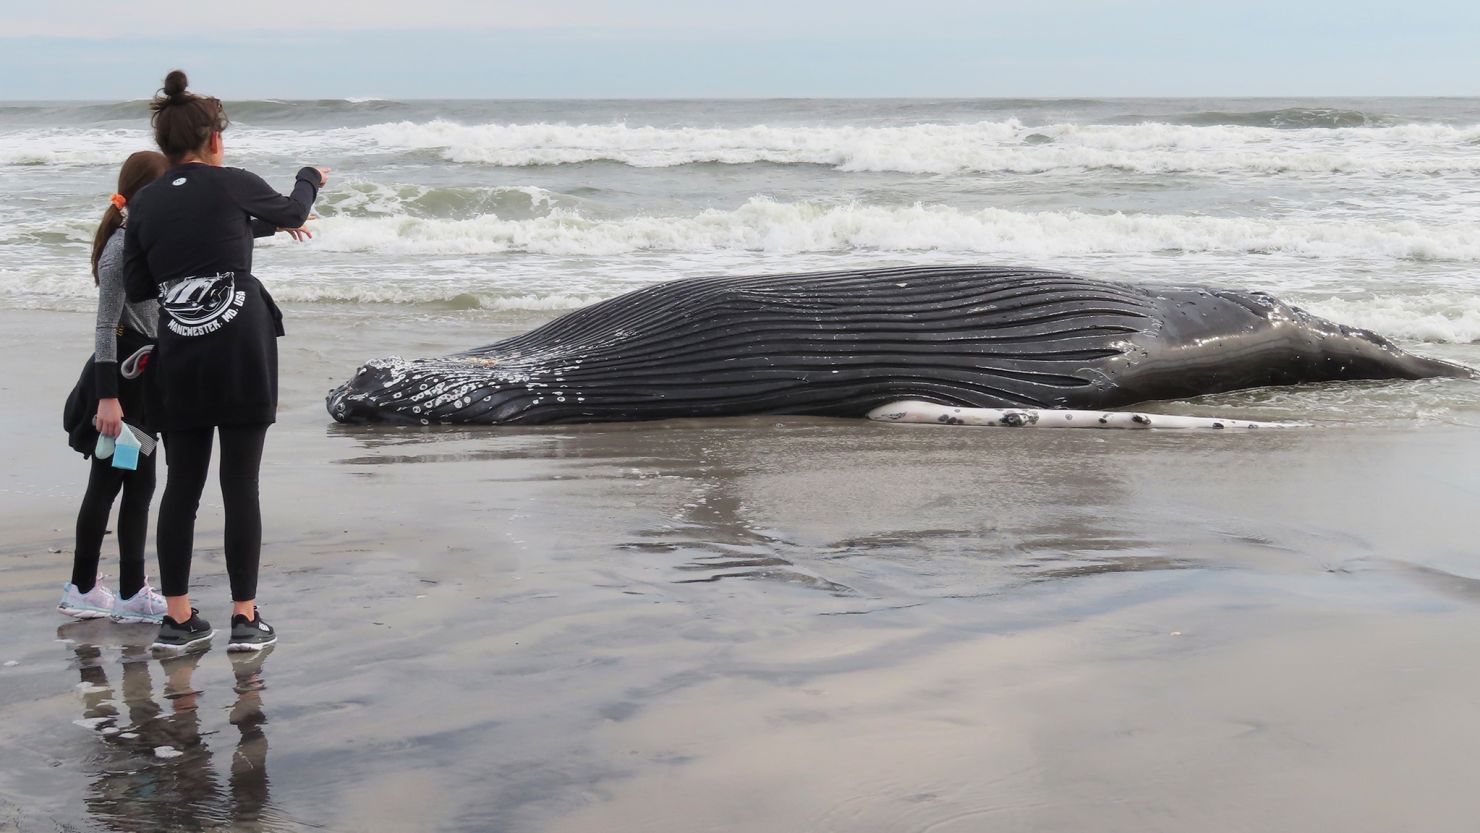 Offshore wind critics call for investigation of New Jersey whale strandings